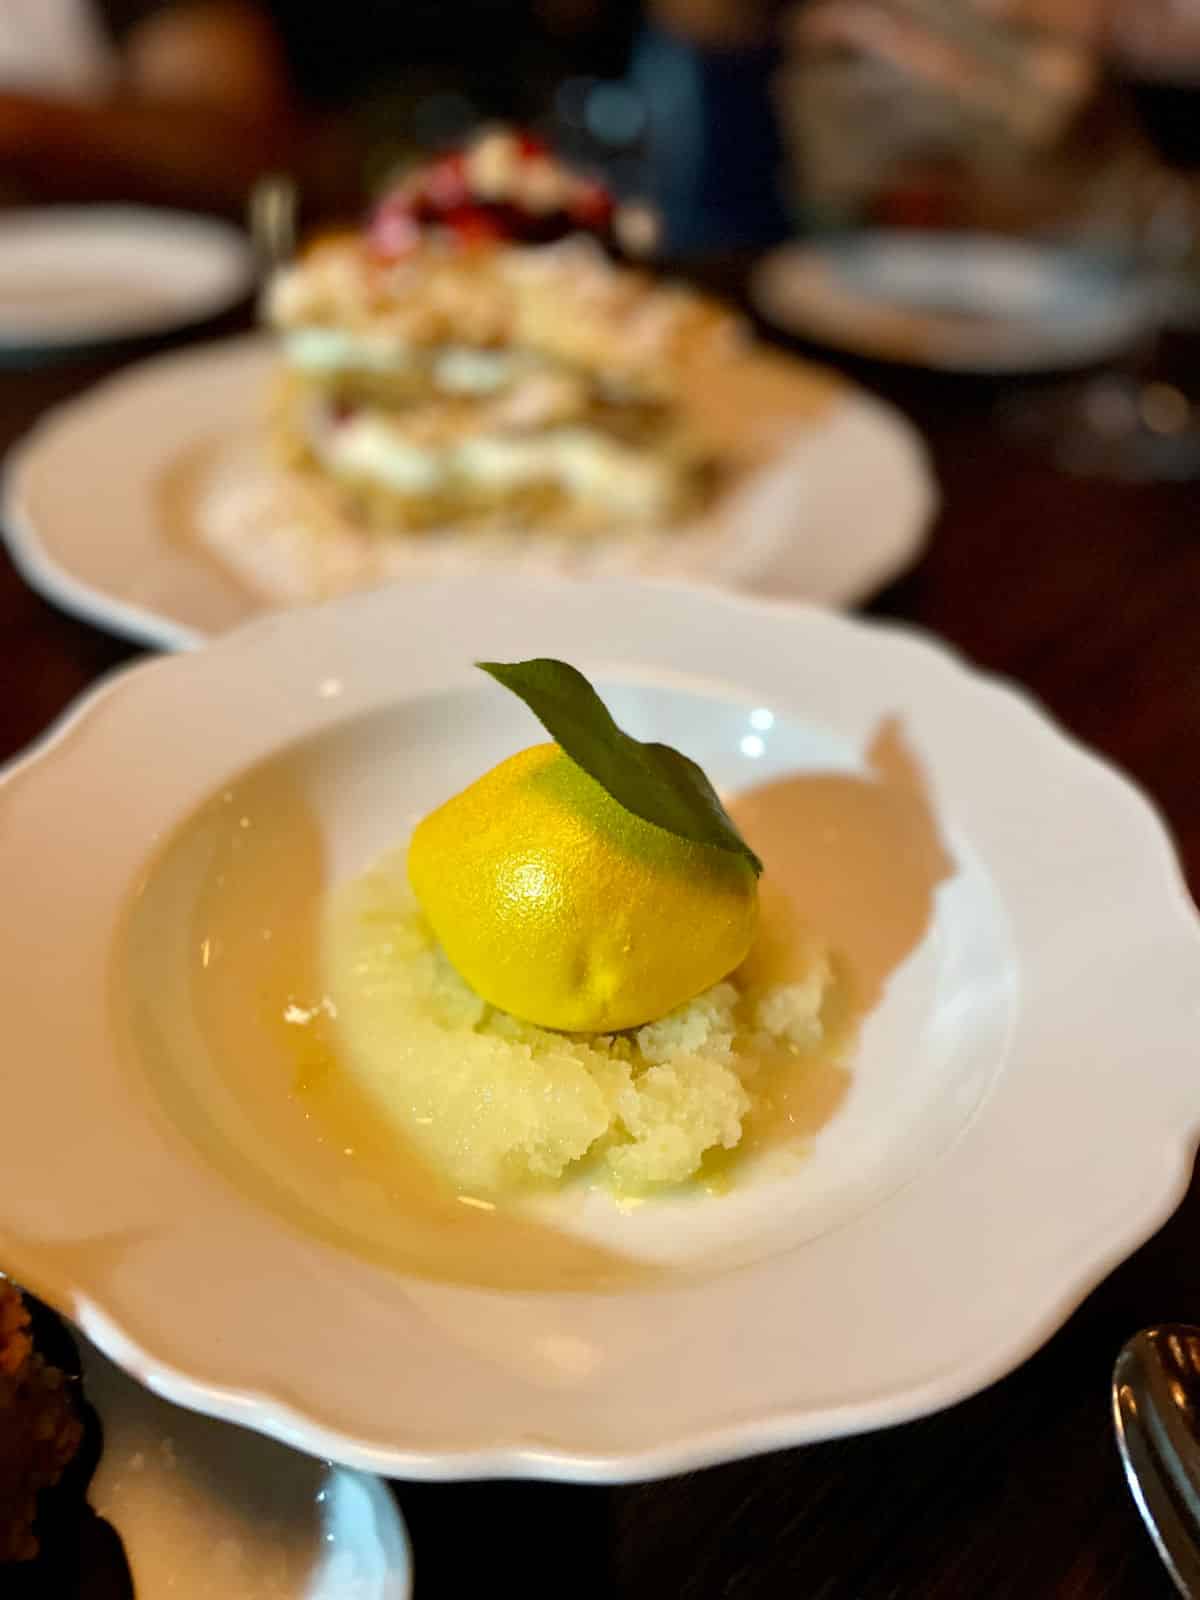 Lemon dessert over sorbet with a green leaf on a white plate.